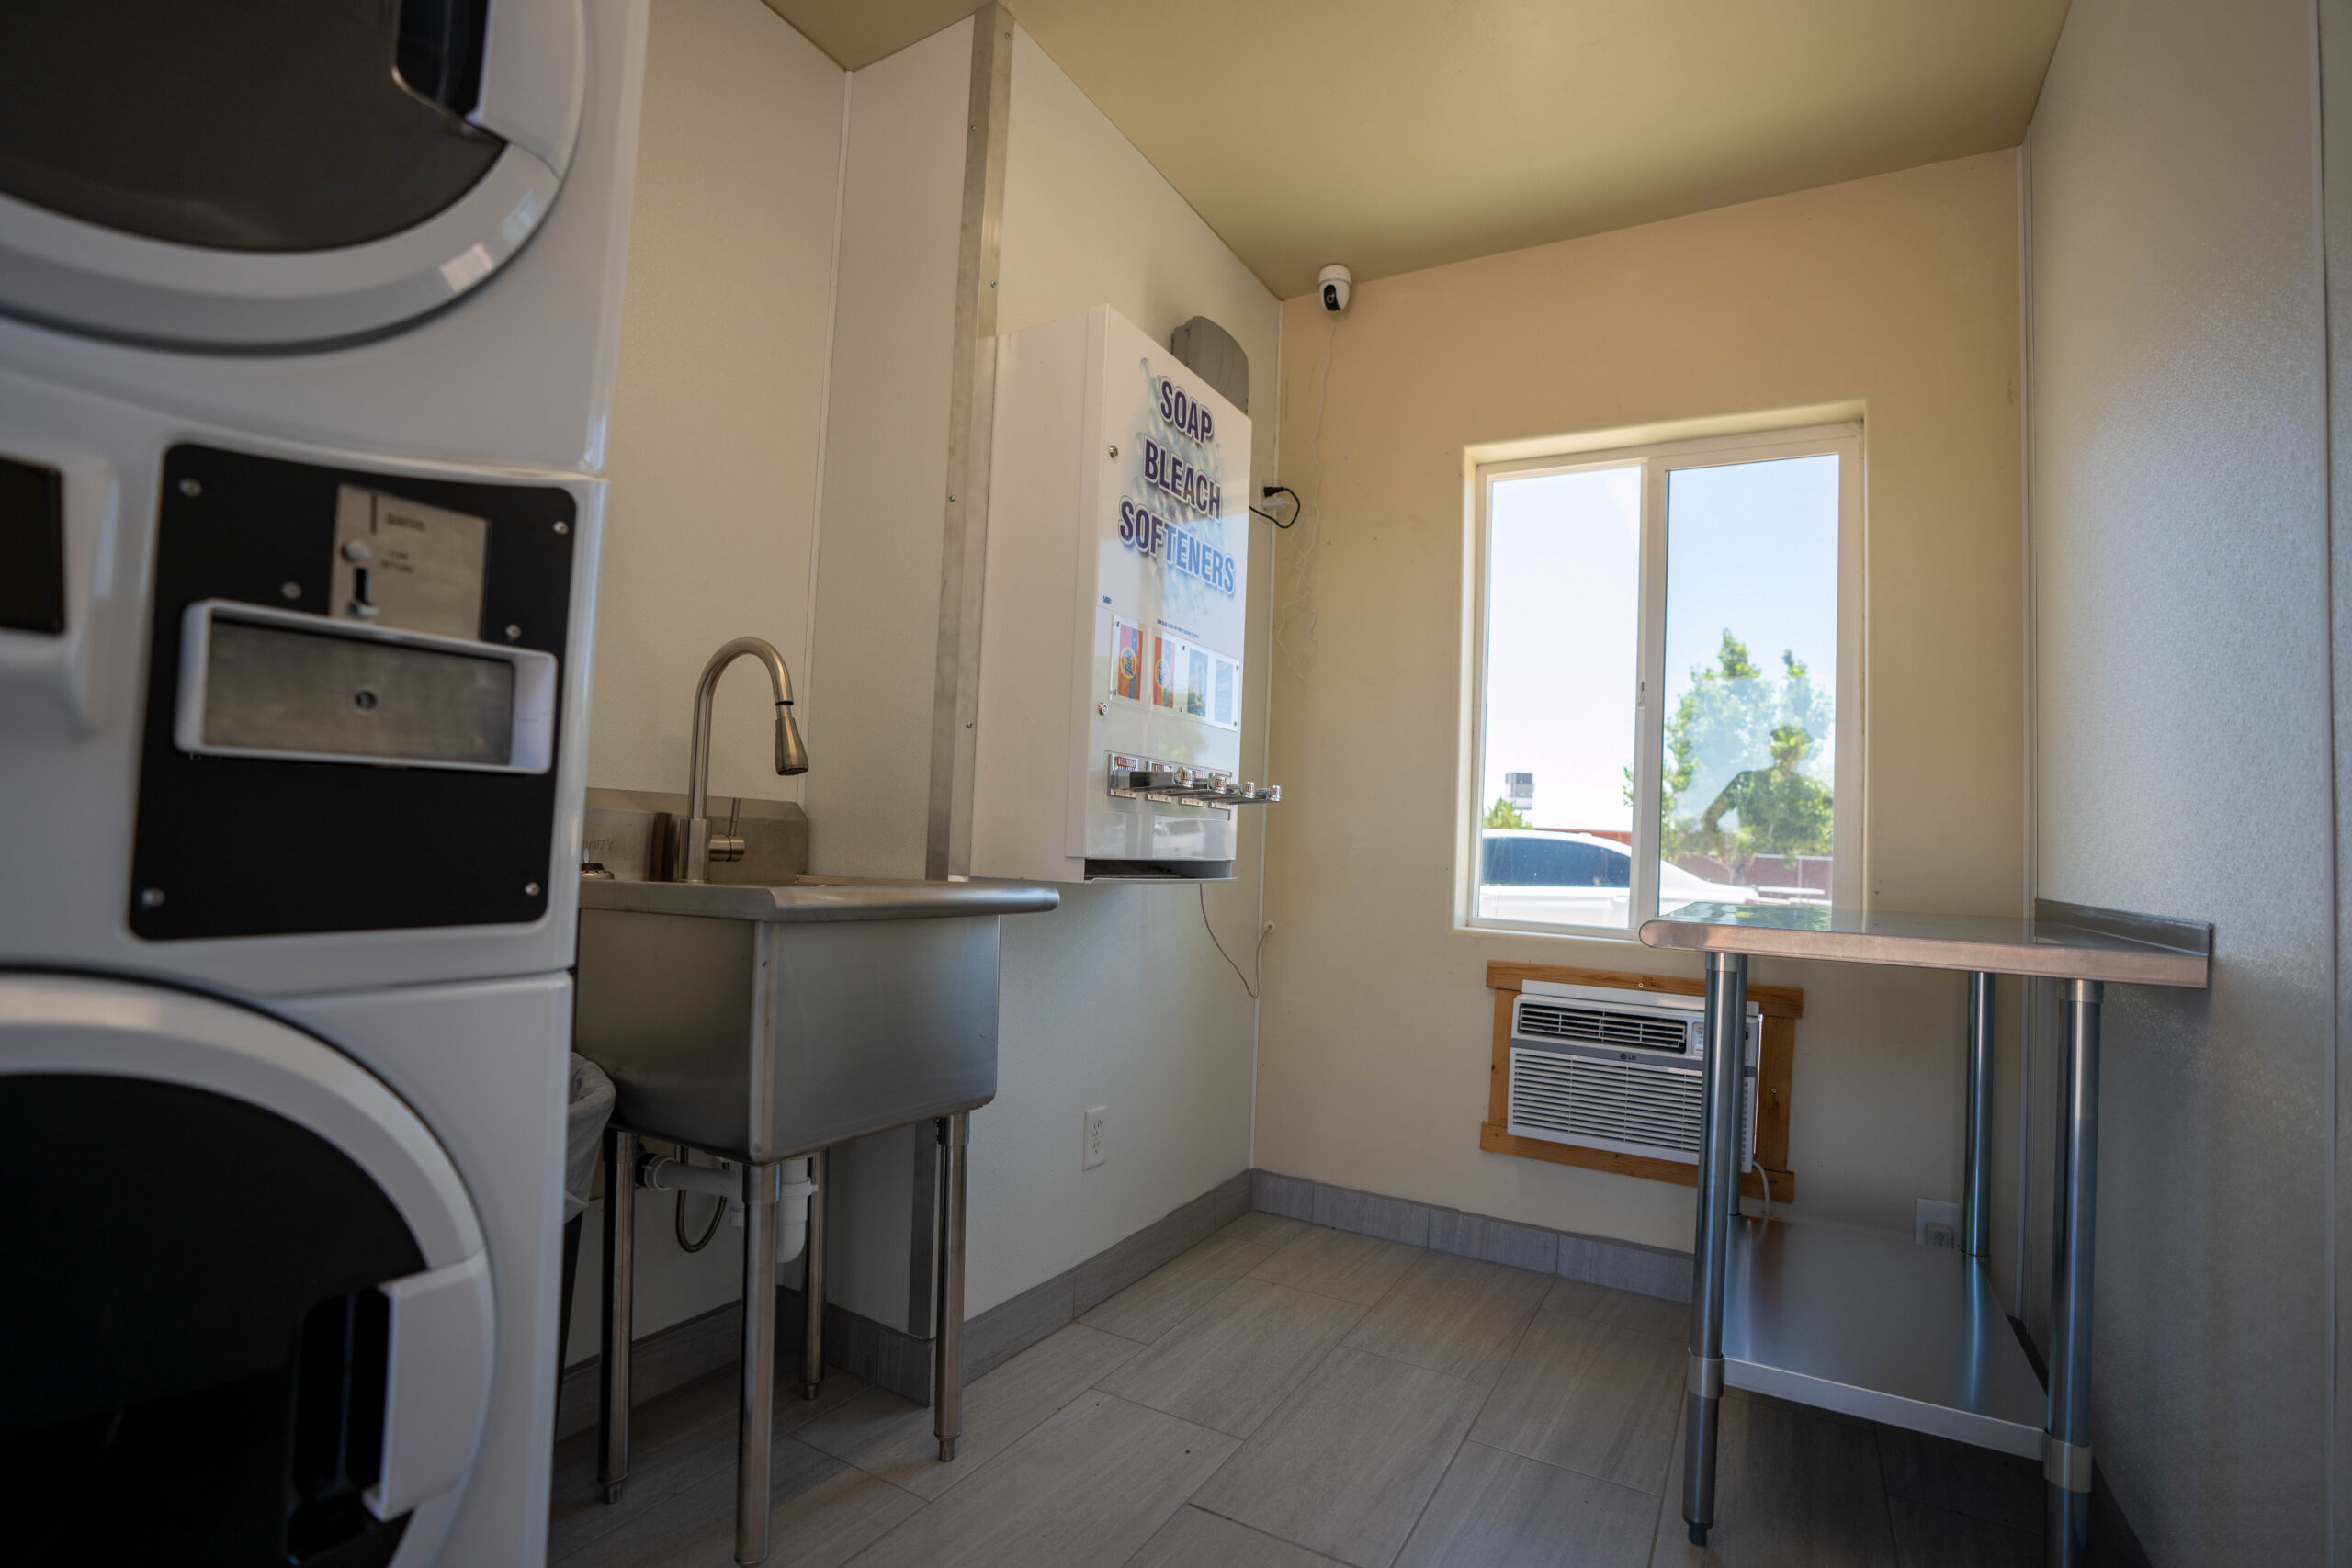 image of laundry facility with sink